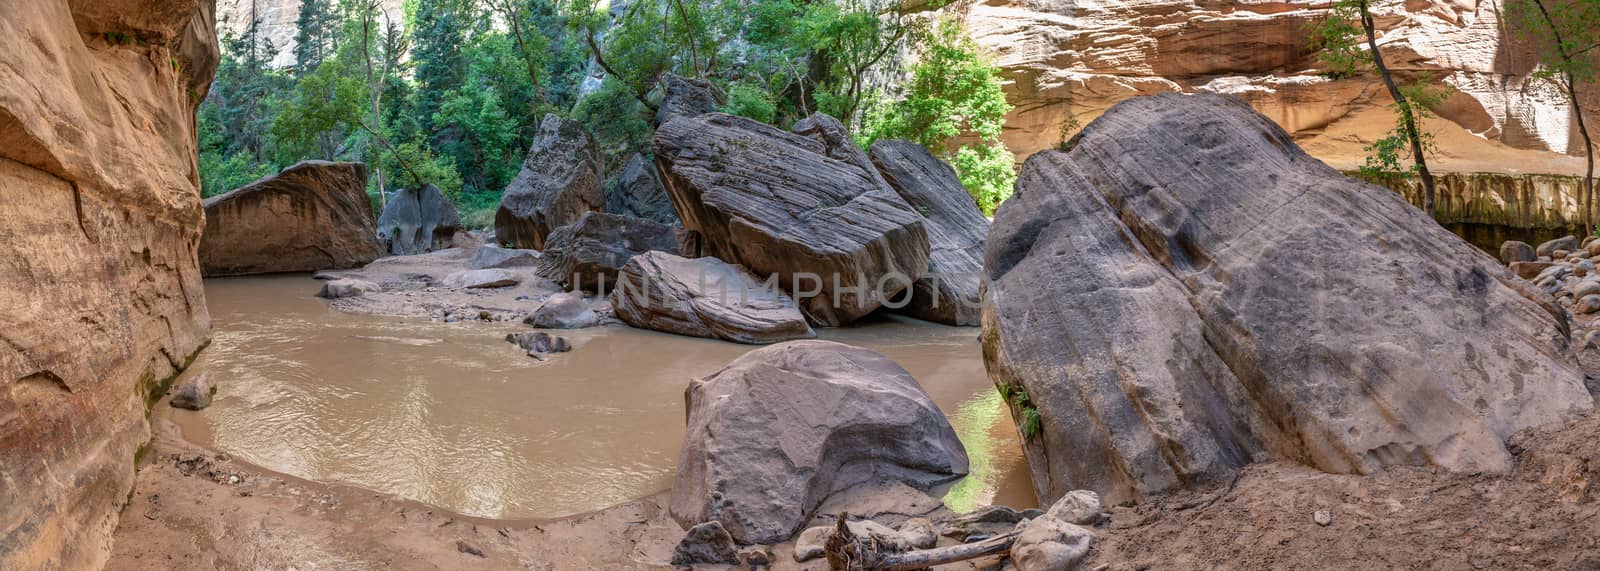 Panorama in the Narrows in Zion National Park, Utah by Njean